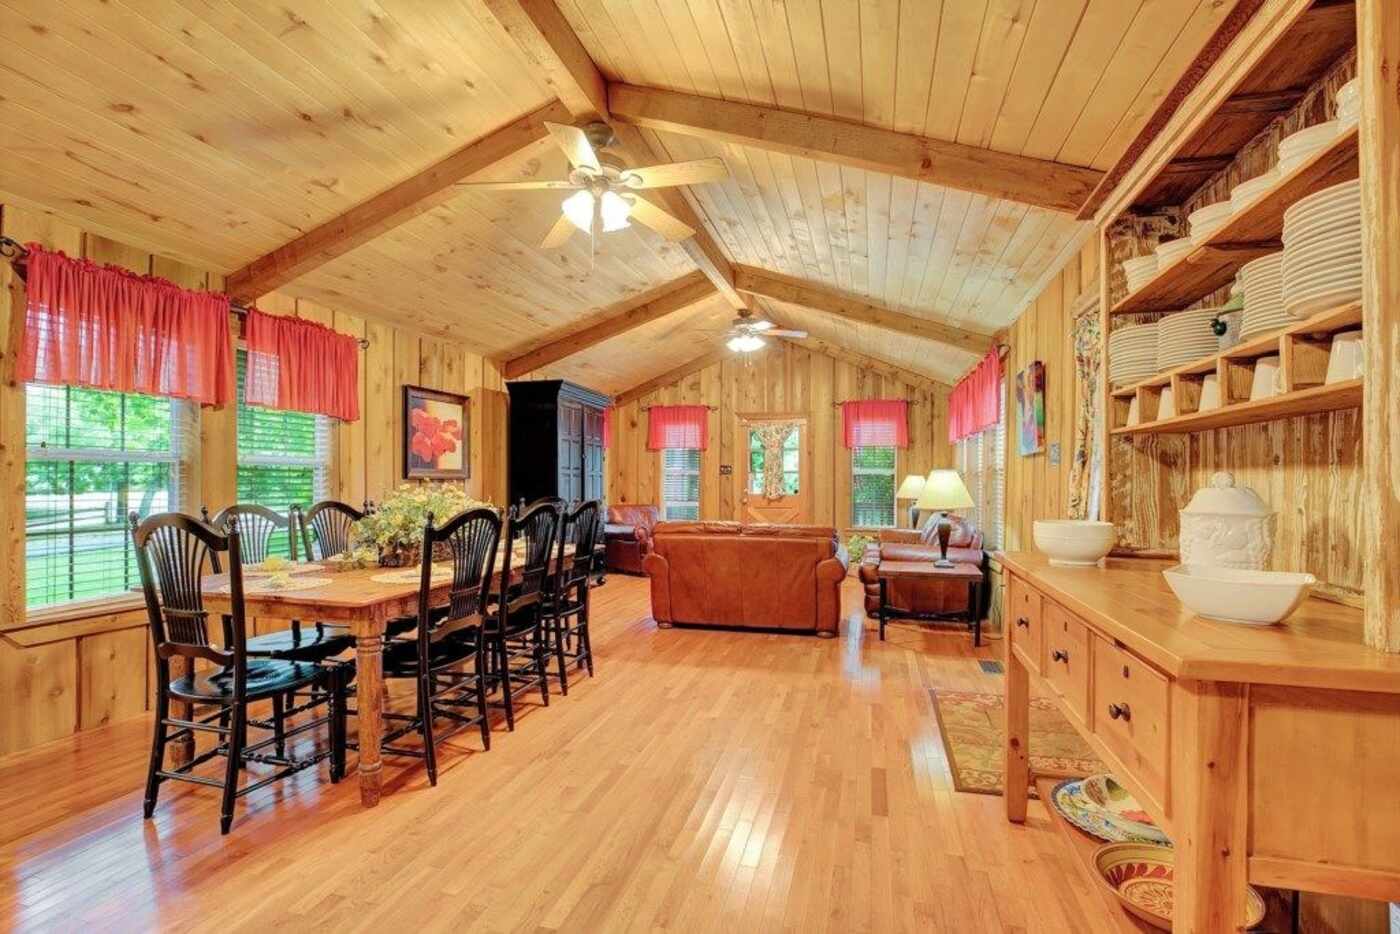 A look at The Gruene River Guest House listing on VRBO.